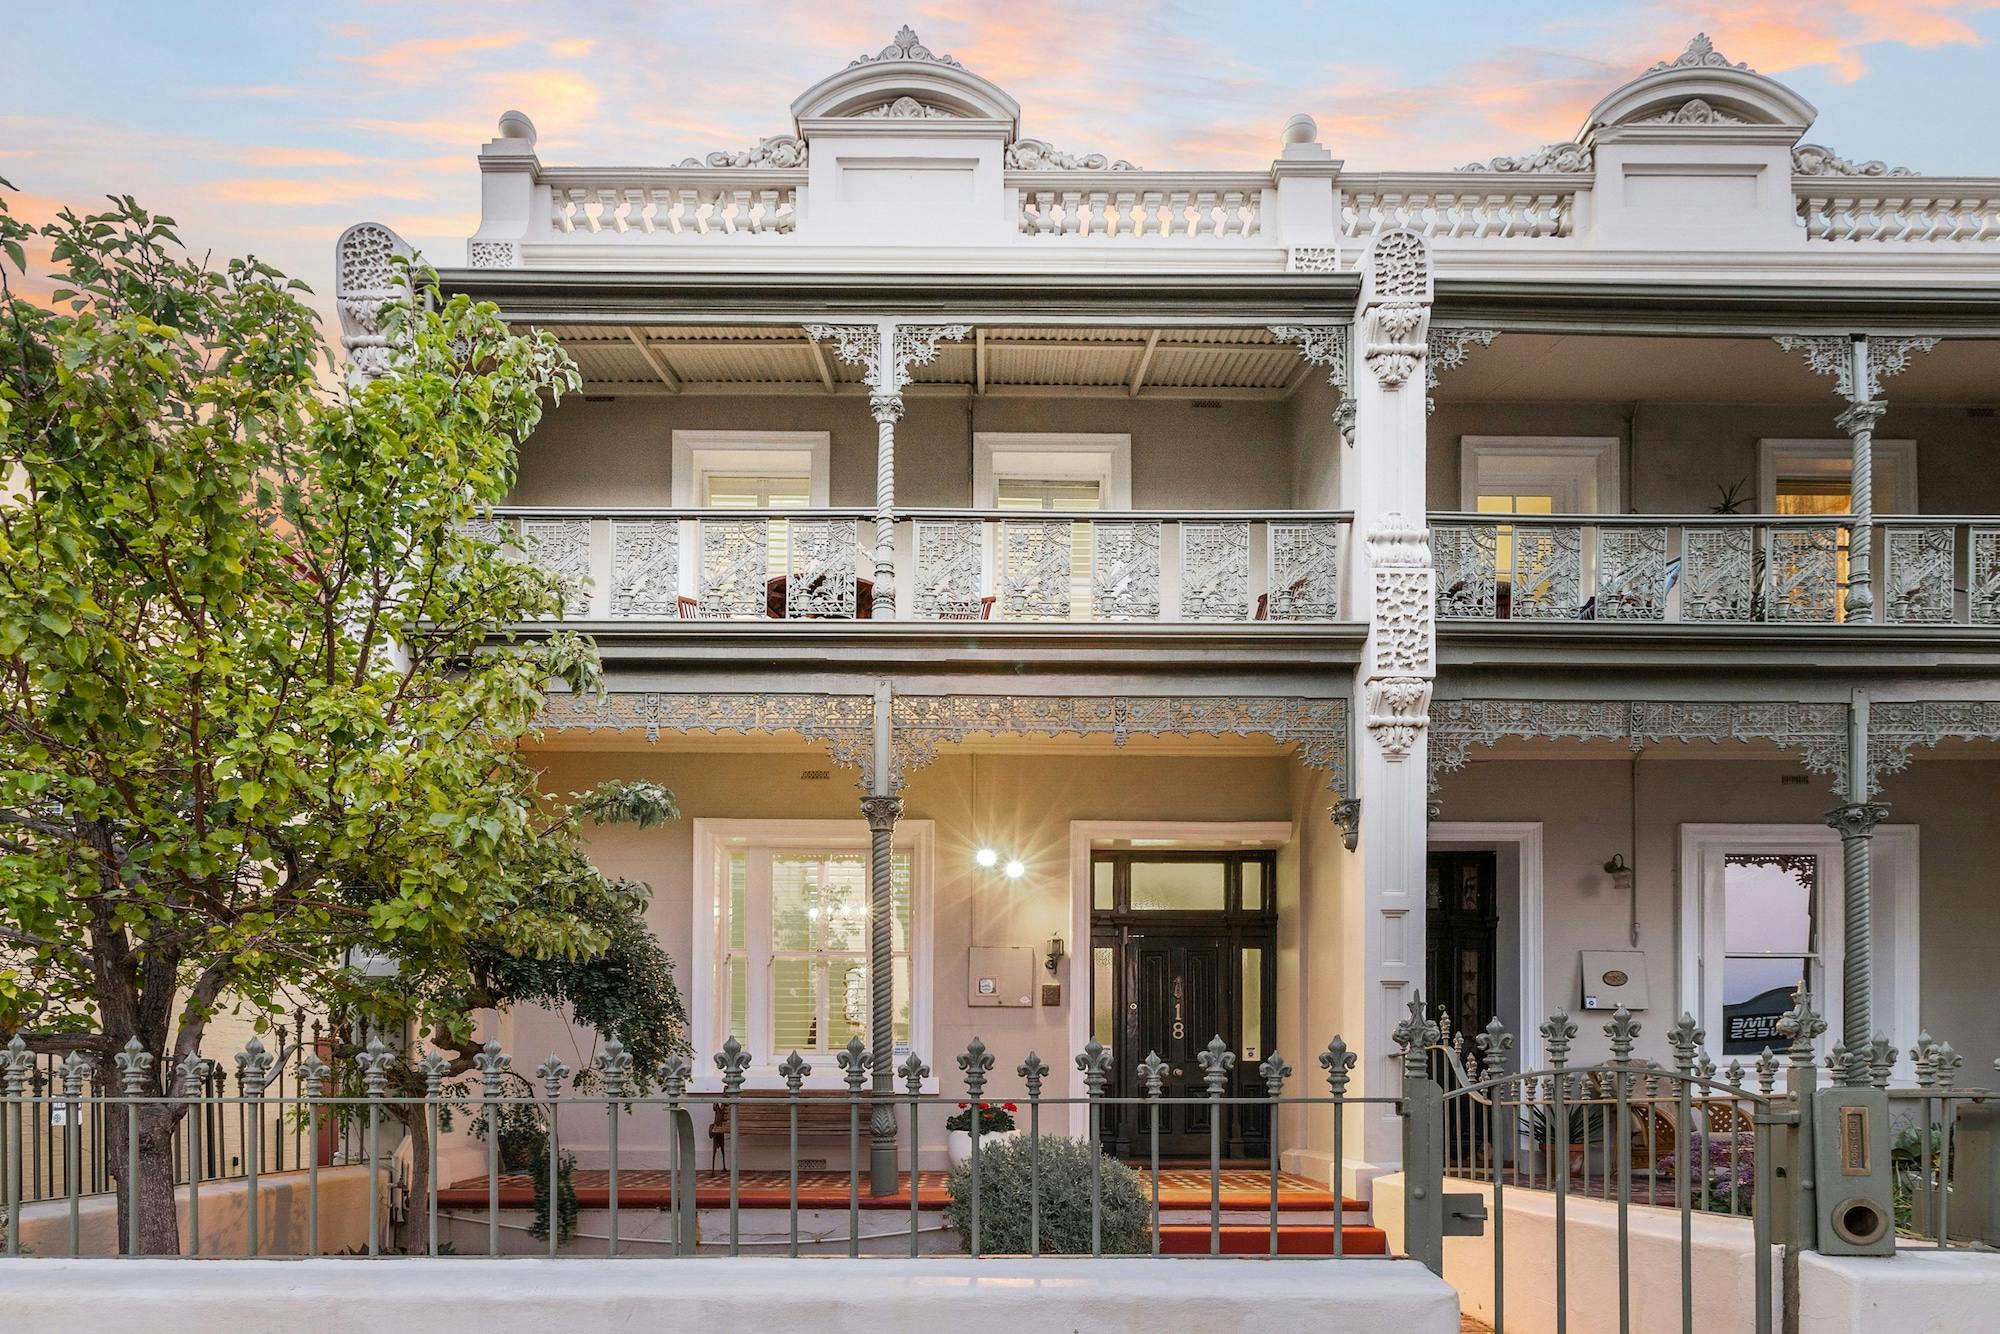 This Heritage Freo Terrace Home On Queen Victoria St Is Now On The Market